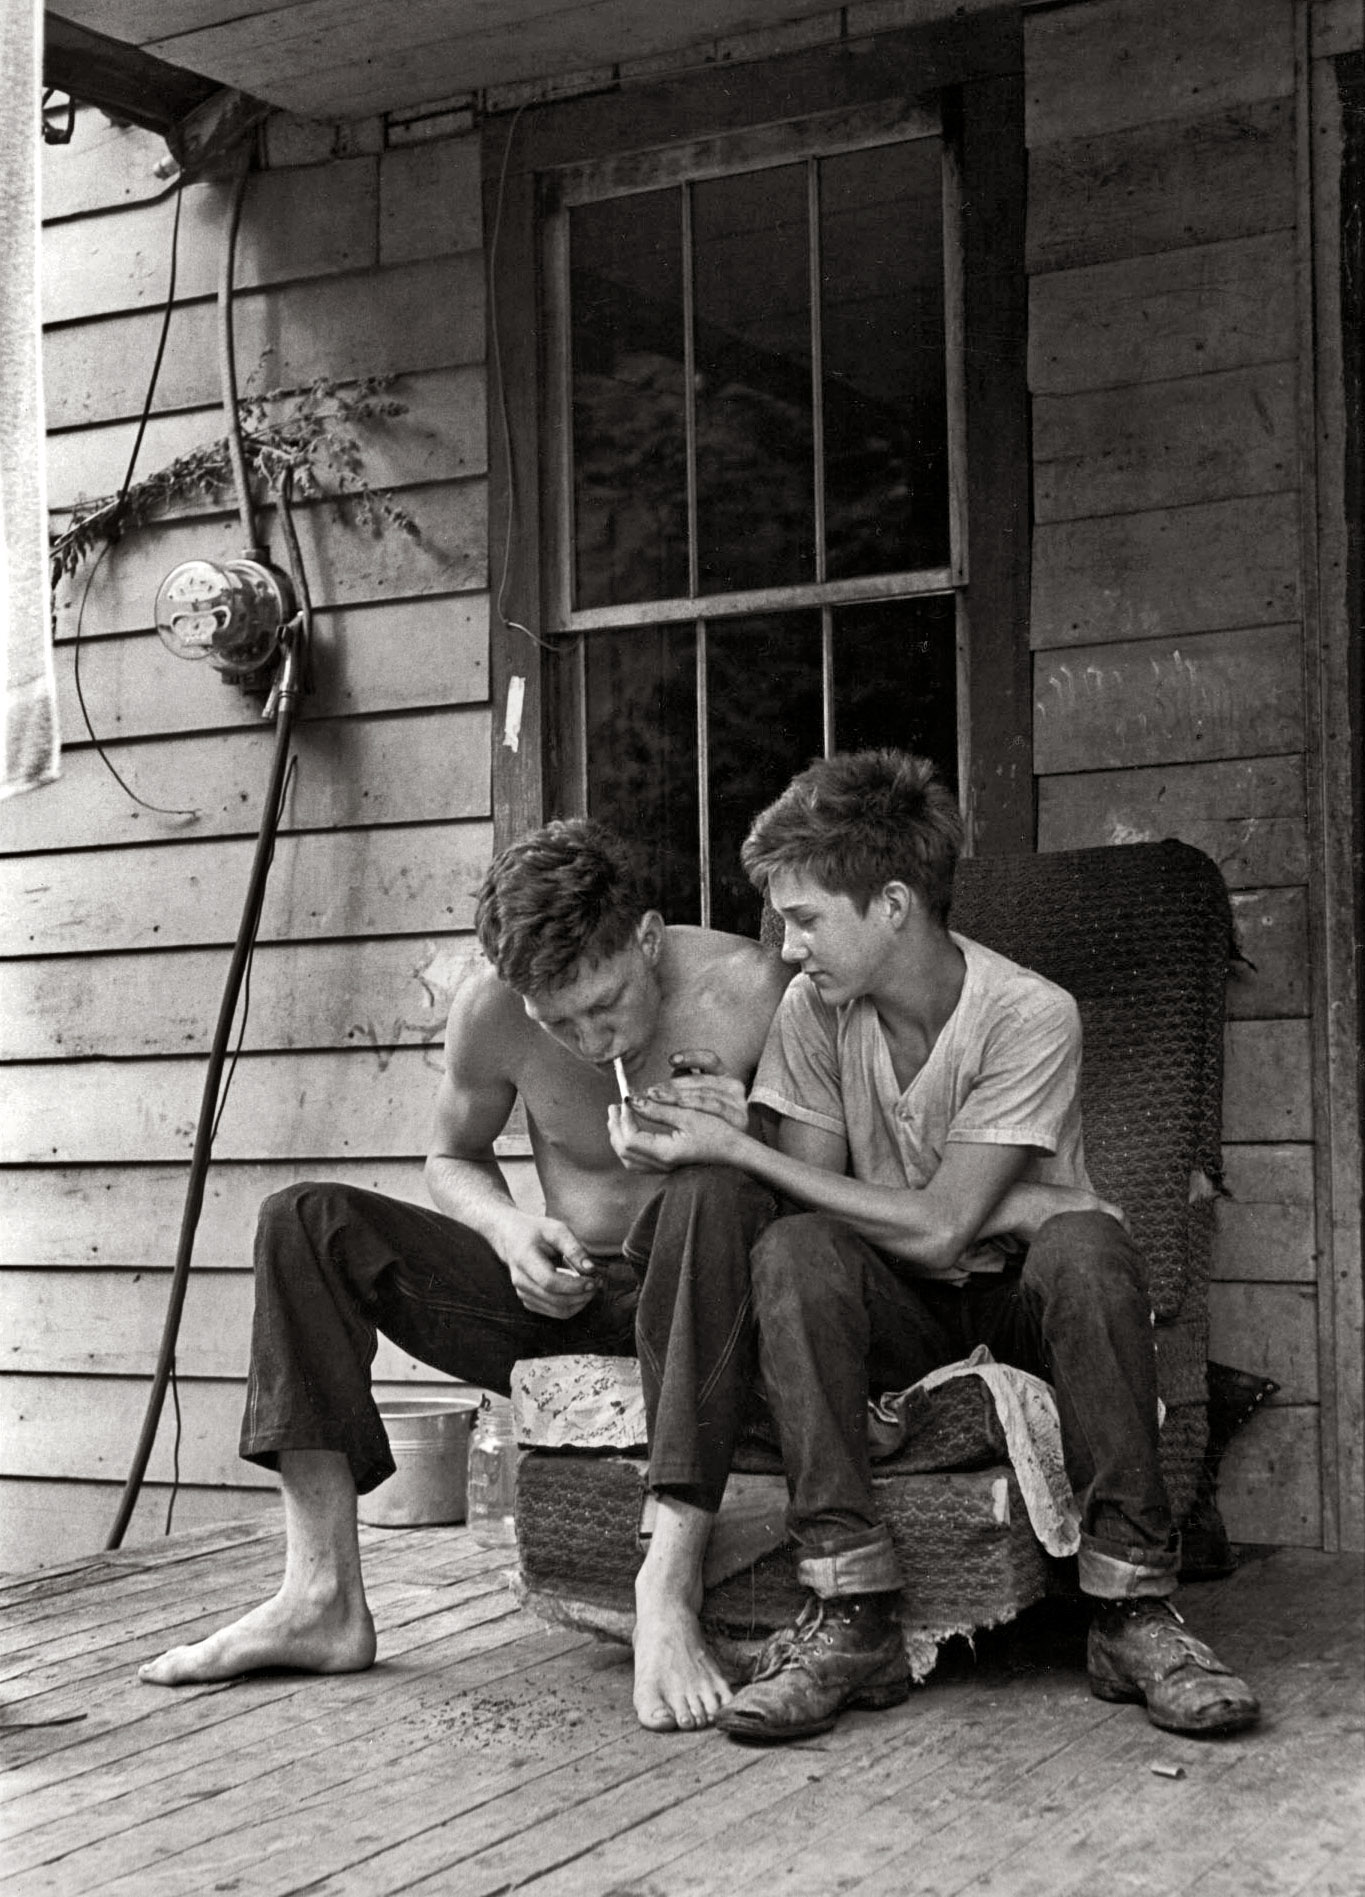 Leatherwood, Kentucky, 1964. "Cornett boys sitting on porch lighting cigarette." From a series of photos made in 1964 and 1972 by William Gedney documenting the lives of Willie and Vivian Cornett, their 12 children and grandchildren. Gedney Photographs Collection, Duke University.  View full size.